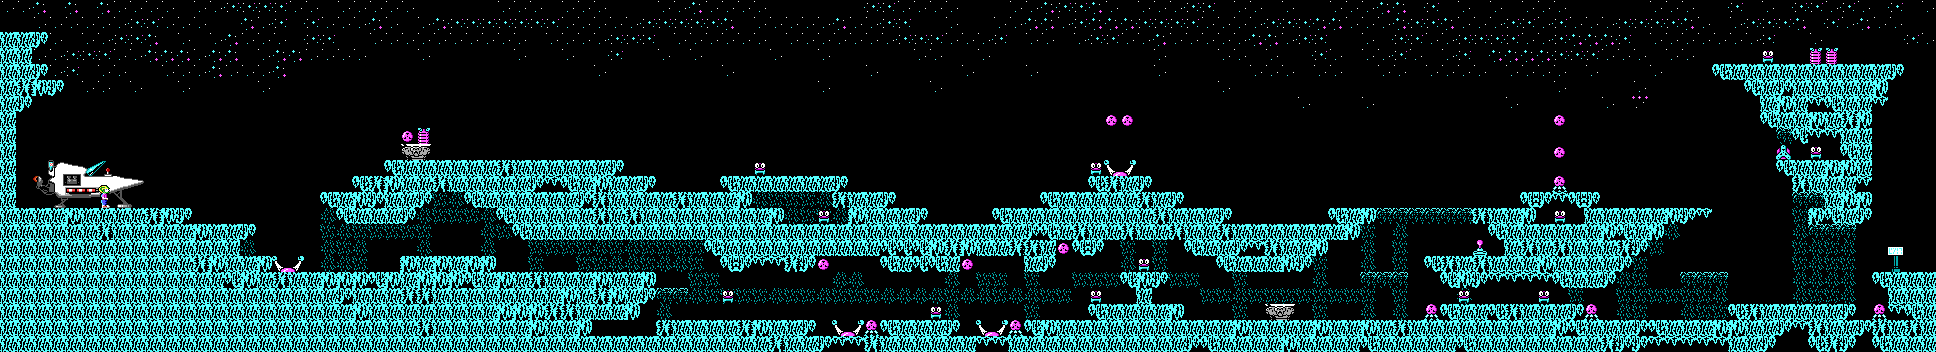 Commander Keen Confronts the Commandeered Planet - Level 01.png